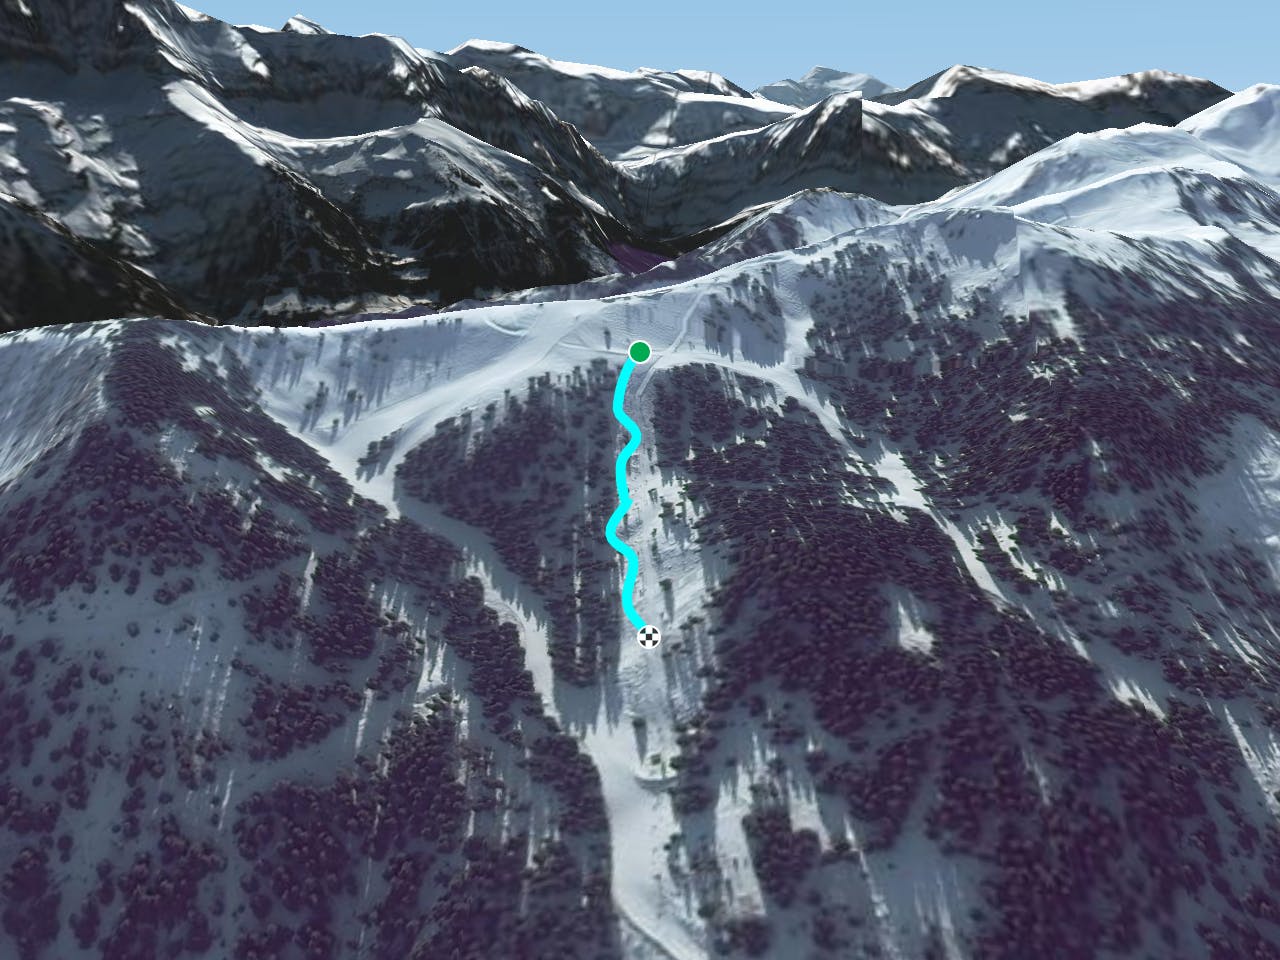 Foilleuse's chairlift line Map